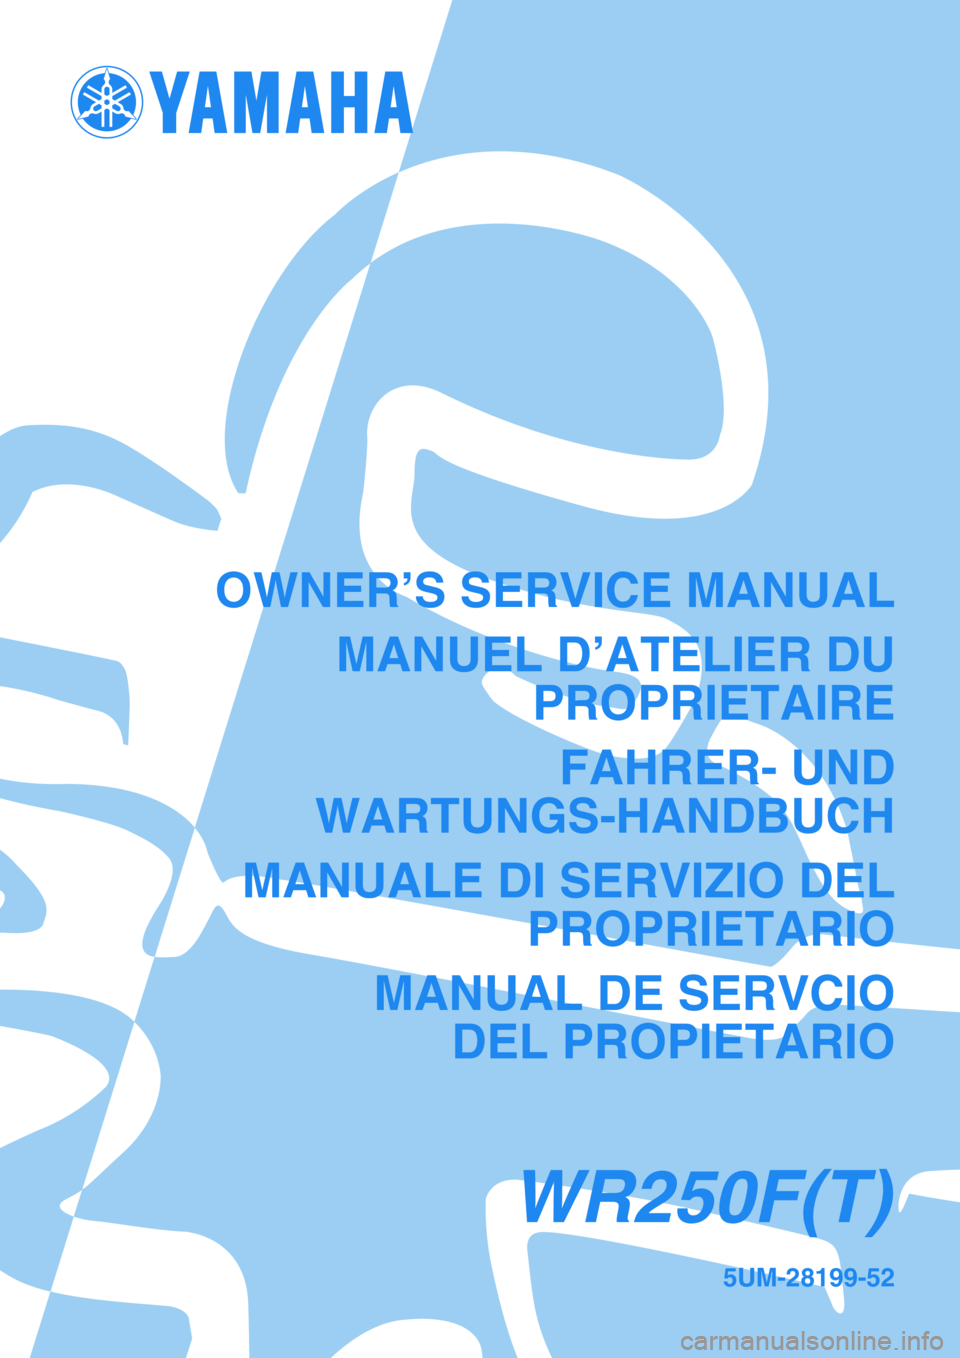 YAMAHA WR 250F 2005  Owners Manual 5UM-28199-52
WR250F(T)
OWNER’S SERVICE MANUAL
MANUEL D’ATELIER DU
PROPRIETAIRE
FAHRER- UND
WARTUNGS-HANDBUCH
MANUALE DI SERVIZIO DEL
PROPRIETARIO
MANUAL DE SERVCIO
DEL PROPIETARIO 